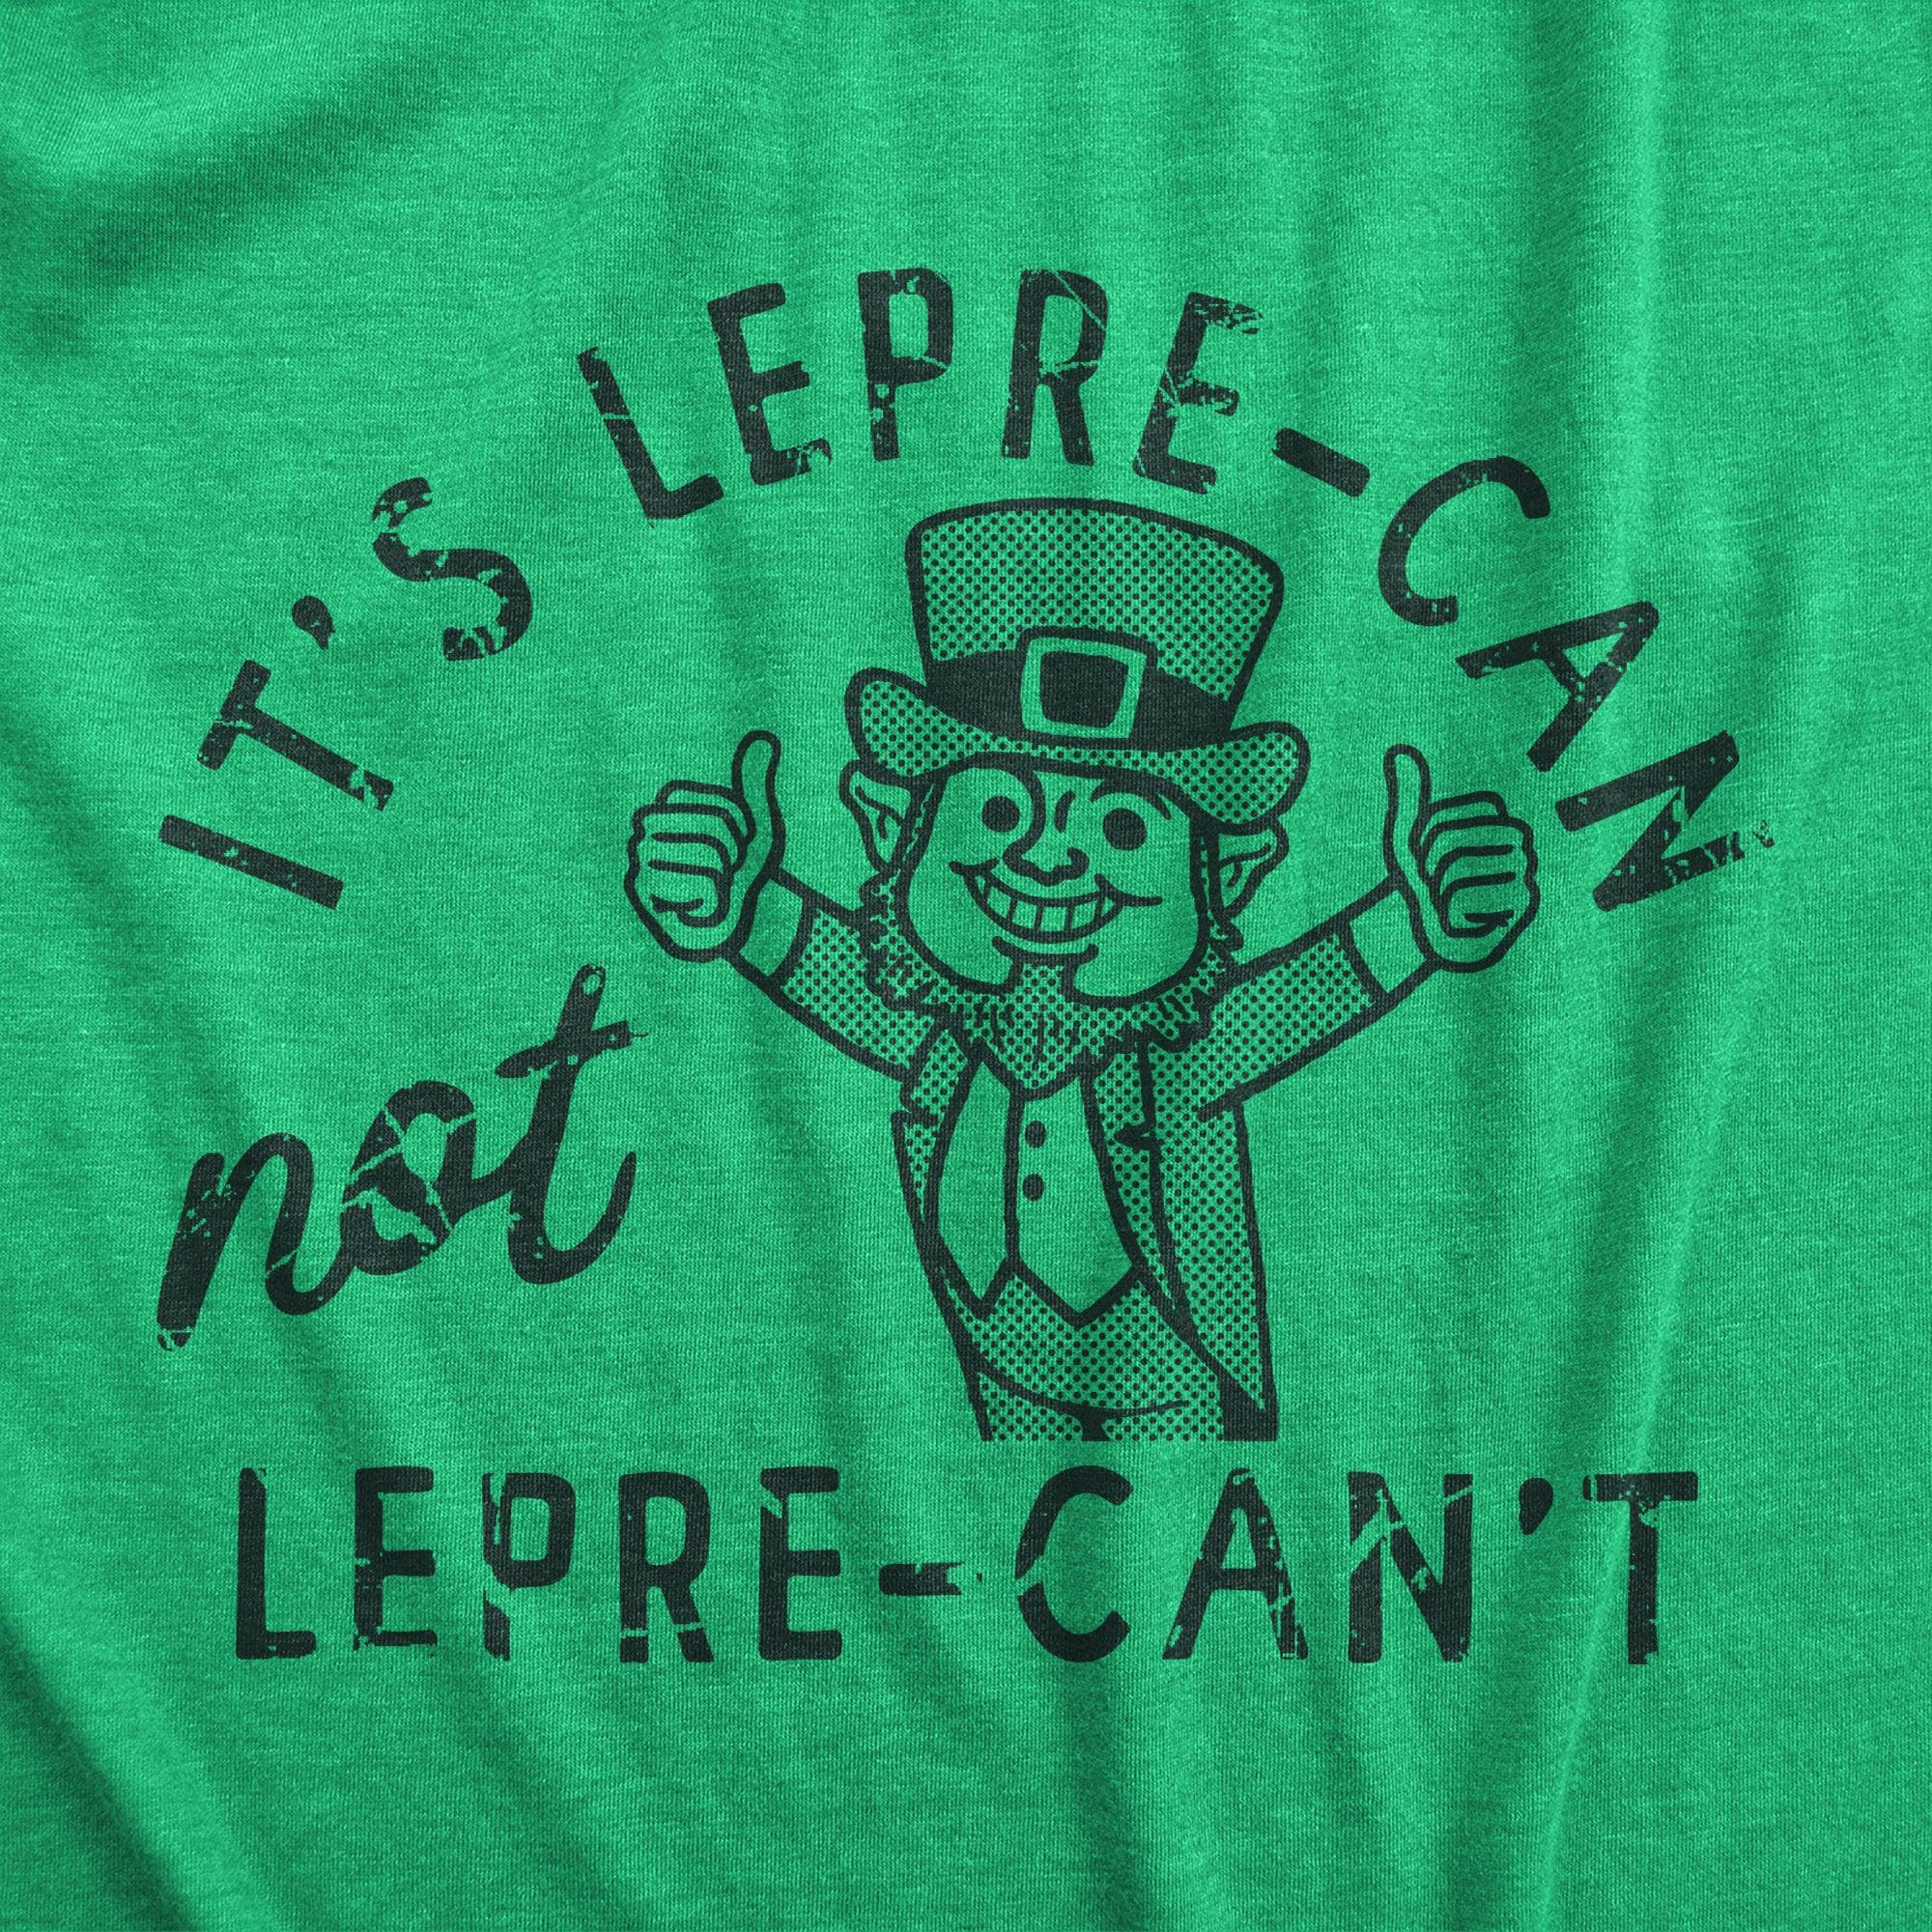 Its Lepre Can Not Lepre Cant Men's Tshirt  -  Crazy Dog T-Shirts